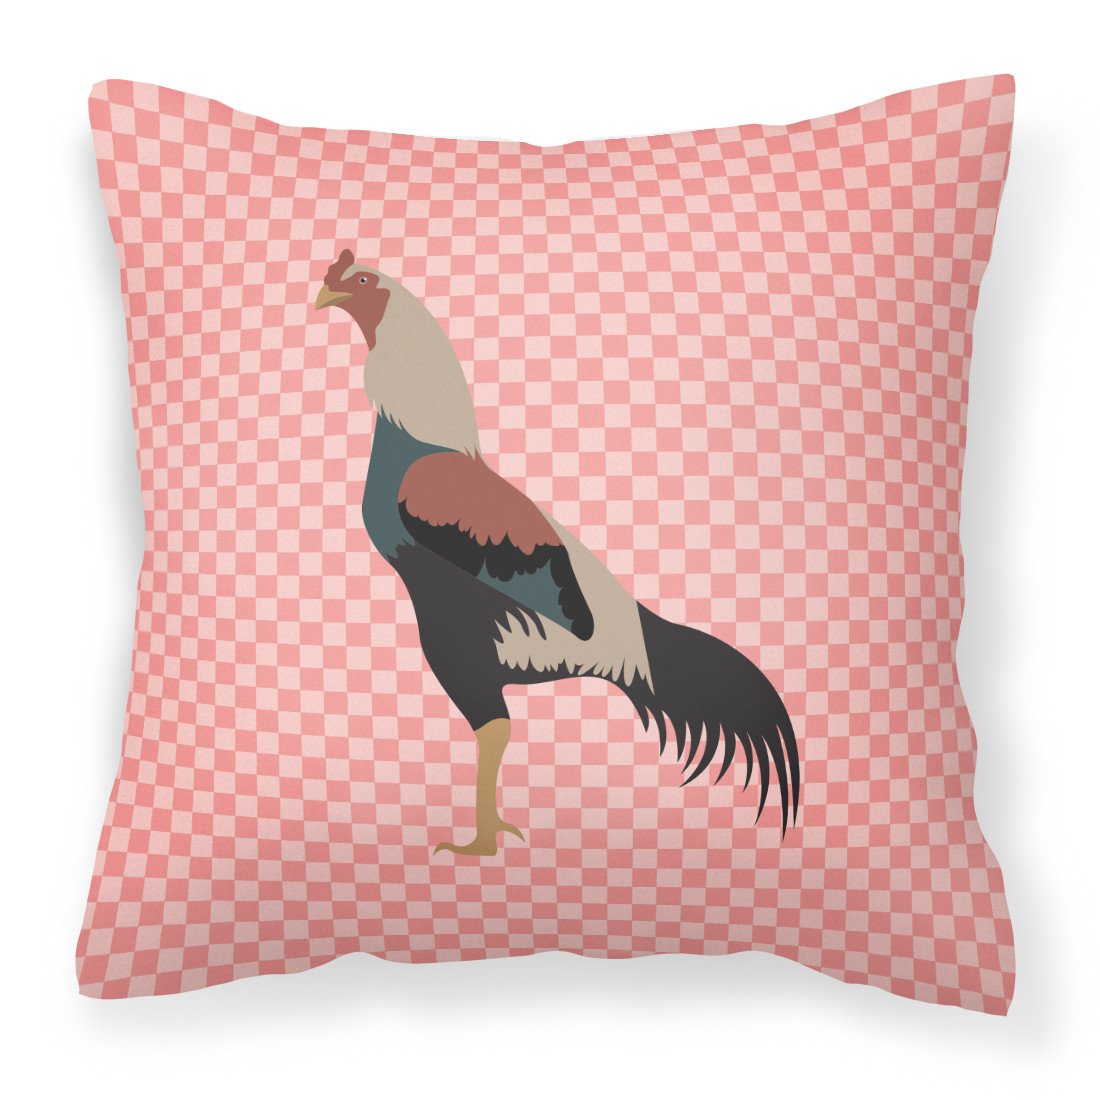 Kulang Chicken Pink Check Fabric Decorative Pillow BB7838PW1818 by Caroline's Treasures